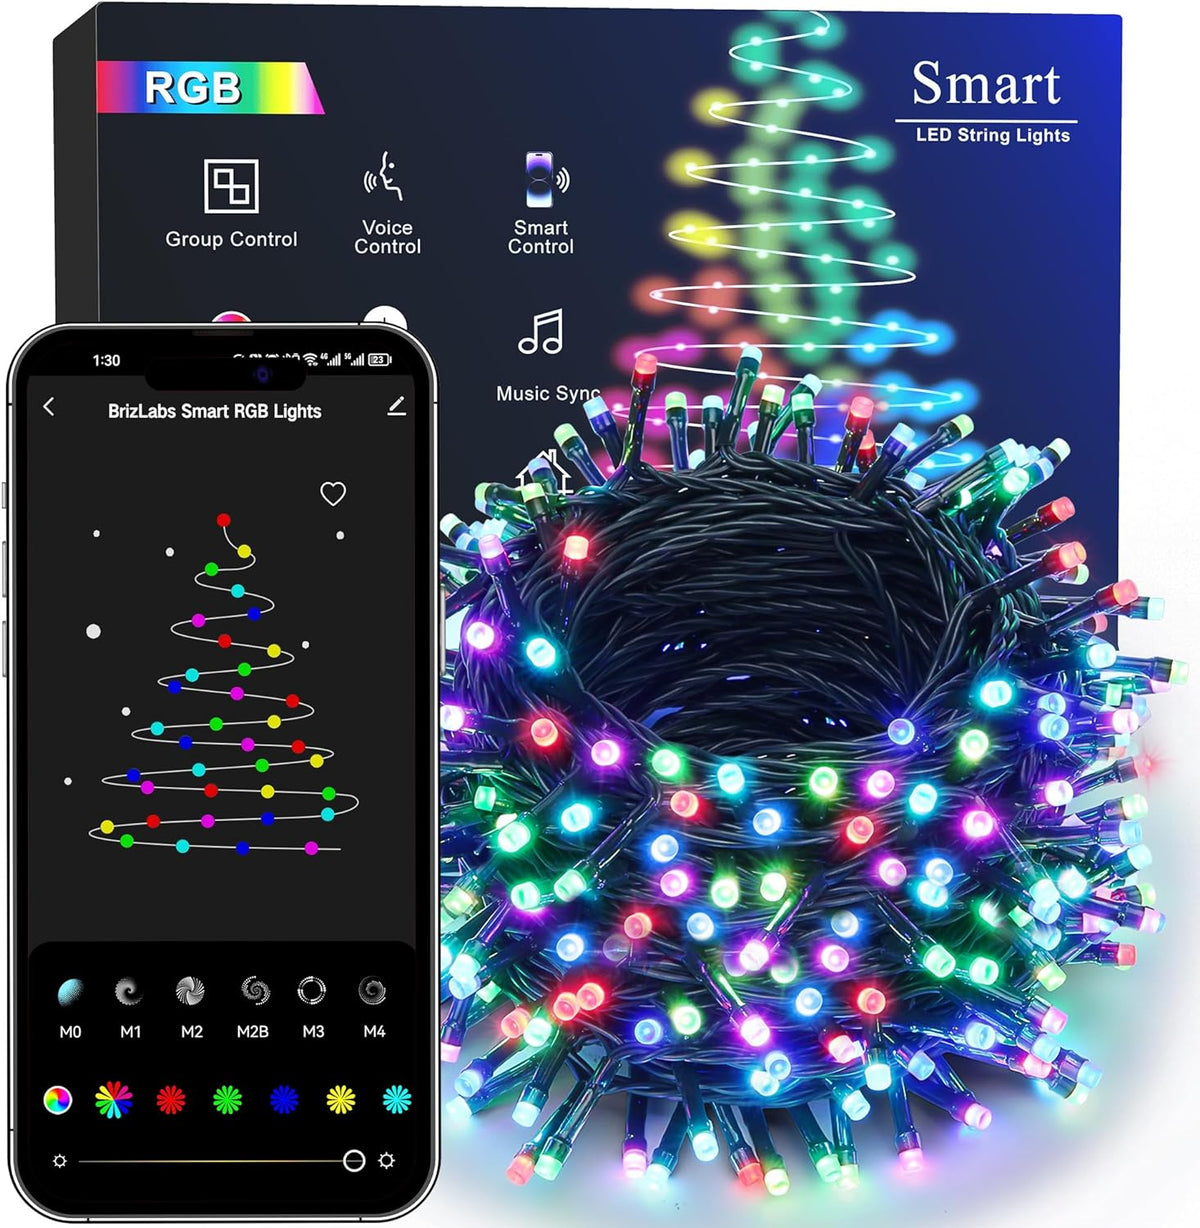 BrizLabs Smart Christmas Lights, 261ft 798 LED WiFi String Lights App Control, Dimmable Color Changing Christmas Lights, RGB Xmas Tree Lights Work with Alexa Google Home for Outdoor Indoor Party Decor